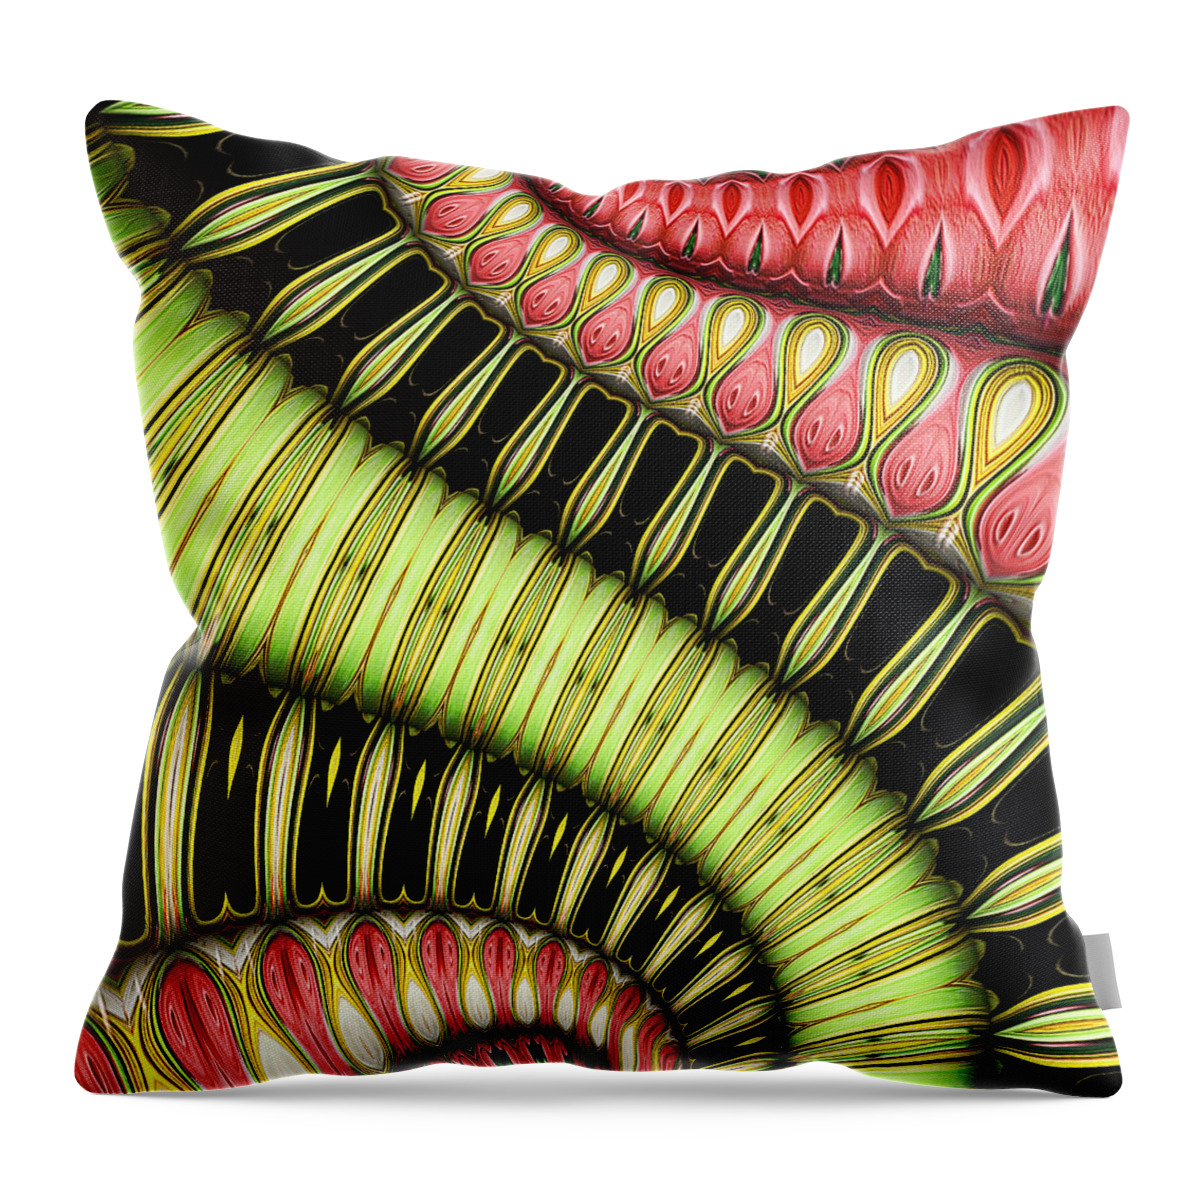 Patterns Throw Pillow featuring the digital art Glissando by Wendy J St Christopher